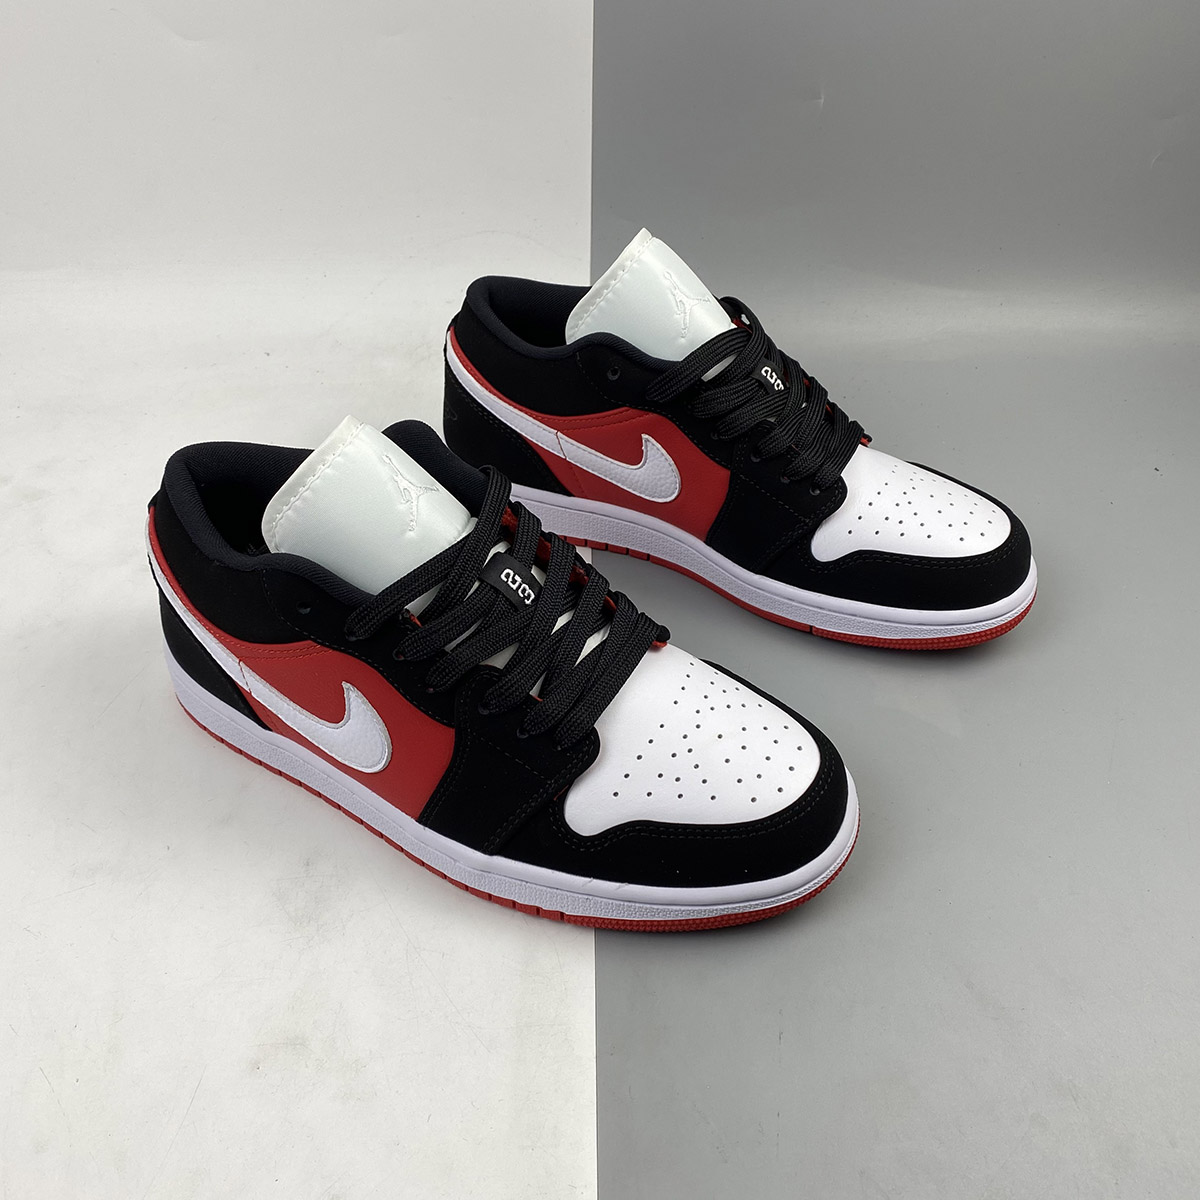 Air Jordan 1 Low ‘Chicago’ Black Red White For Sale – The Sole Line